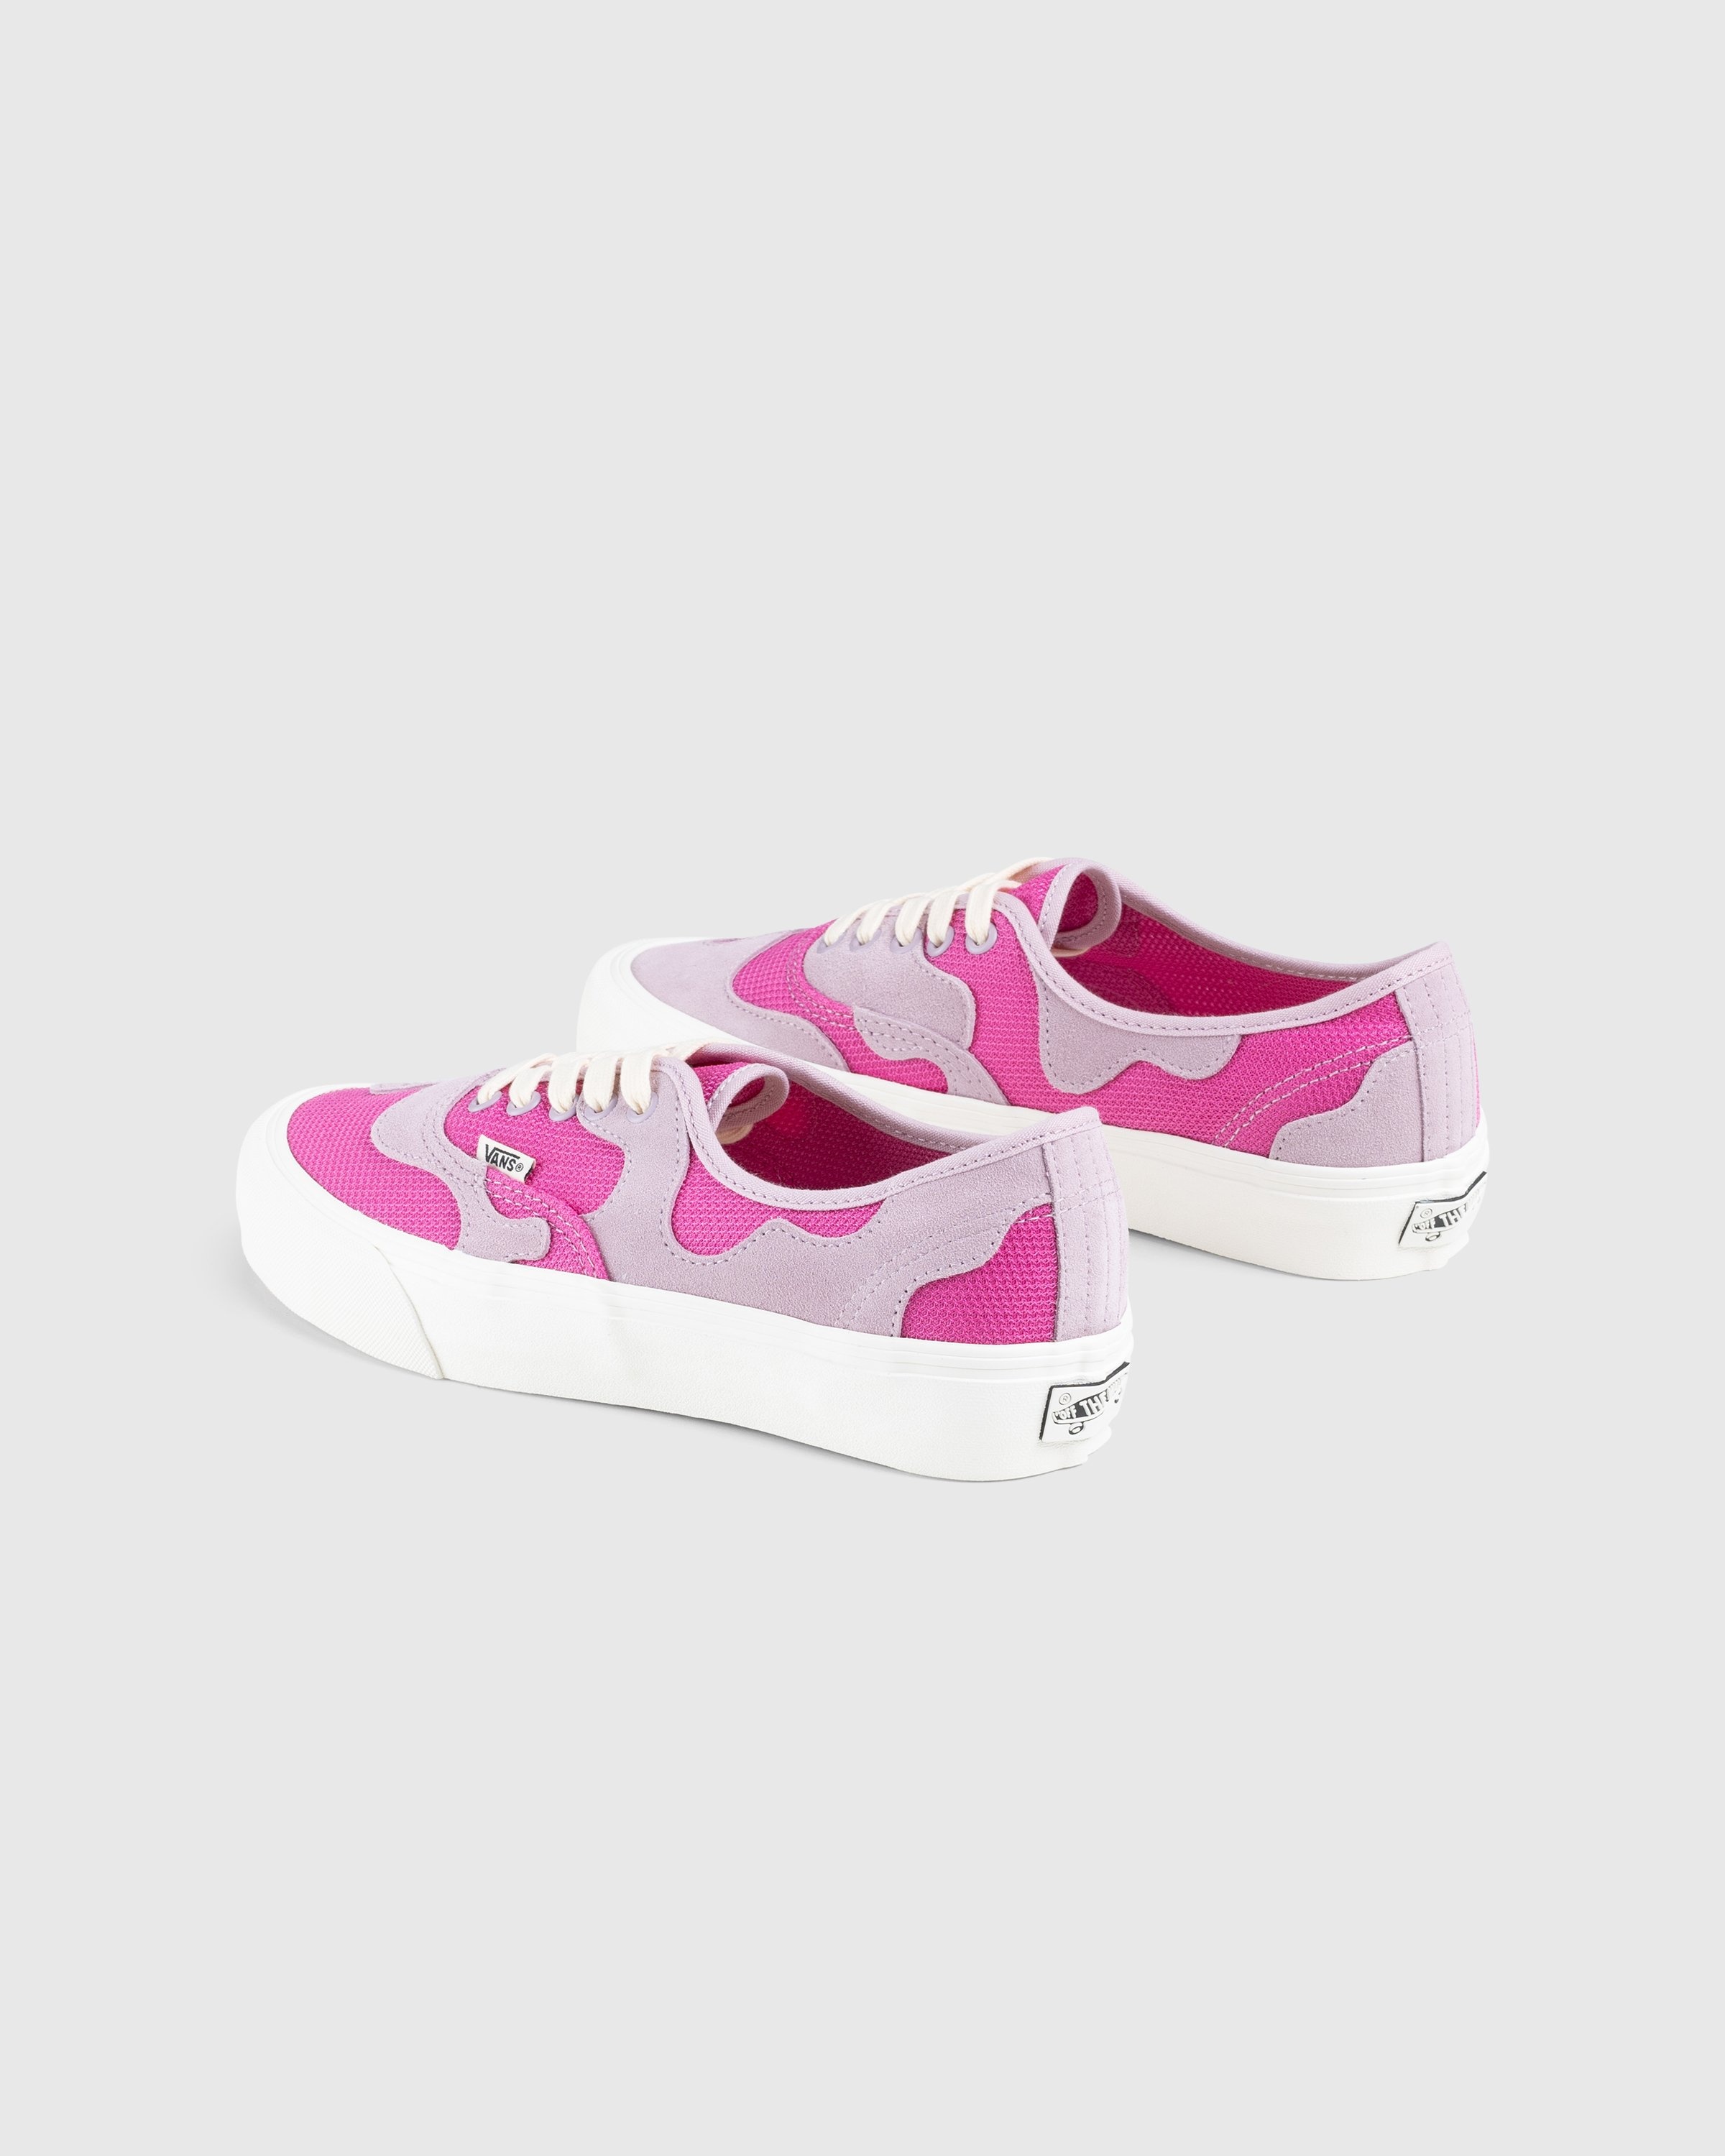 Vans – UA Authentic VR3 PW LX Pink - Sneakers - Pink - Image 4